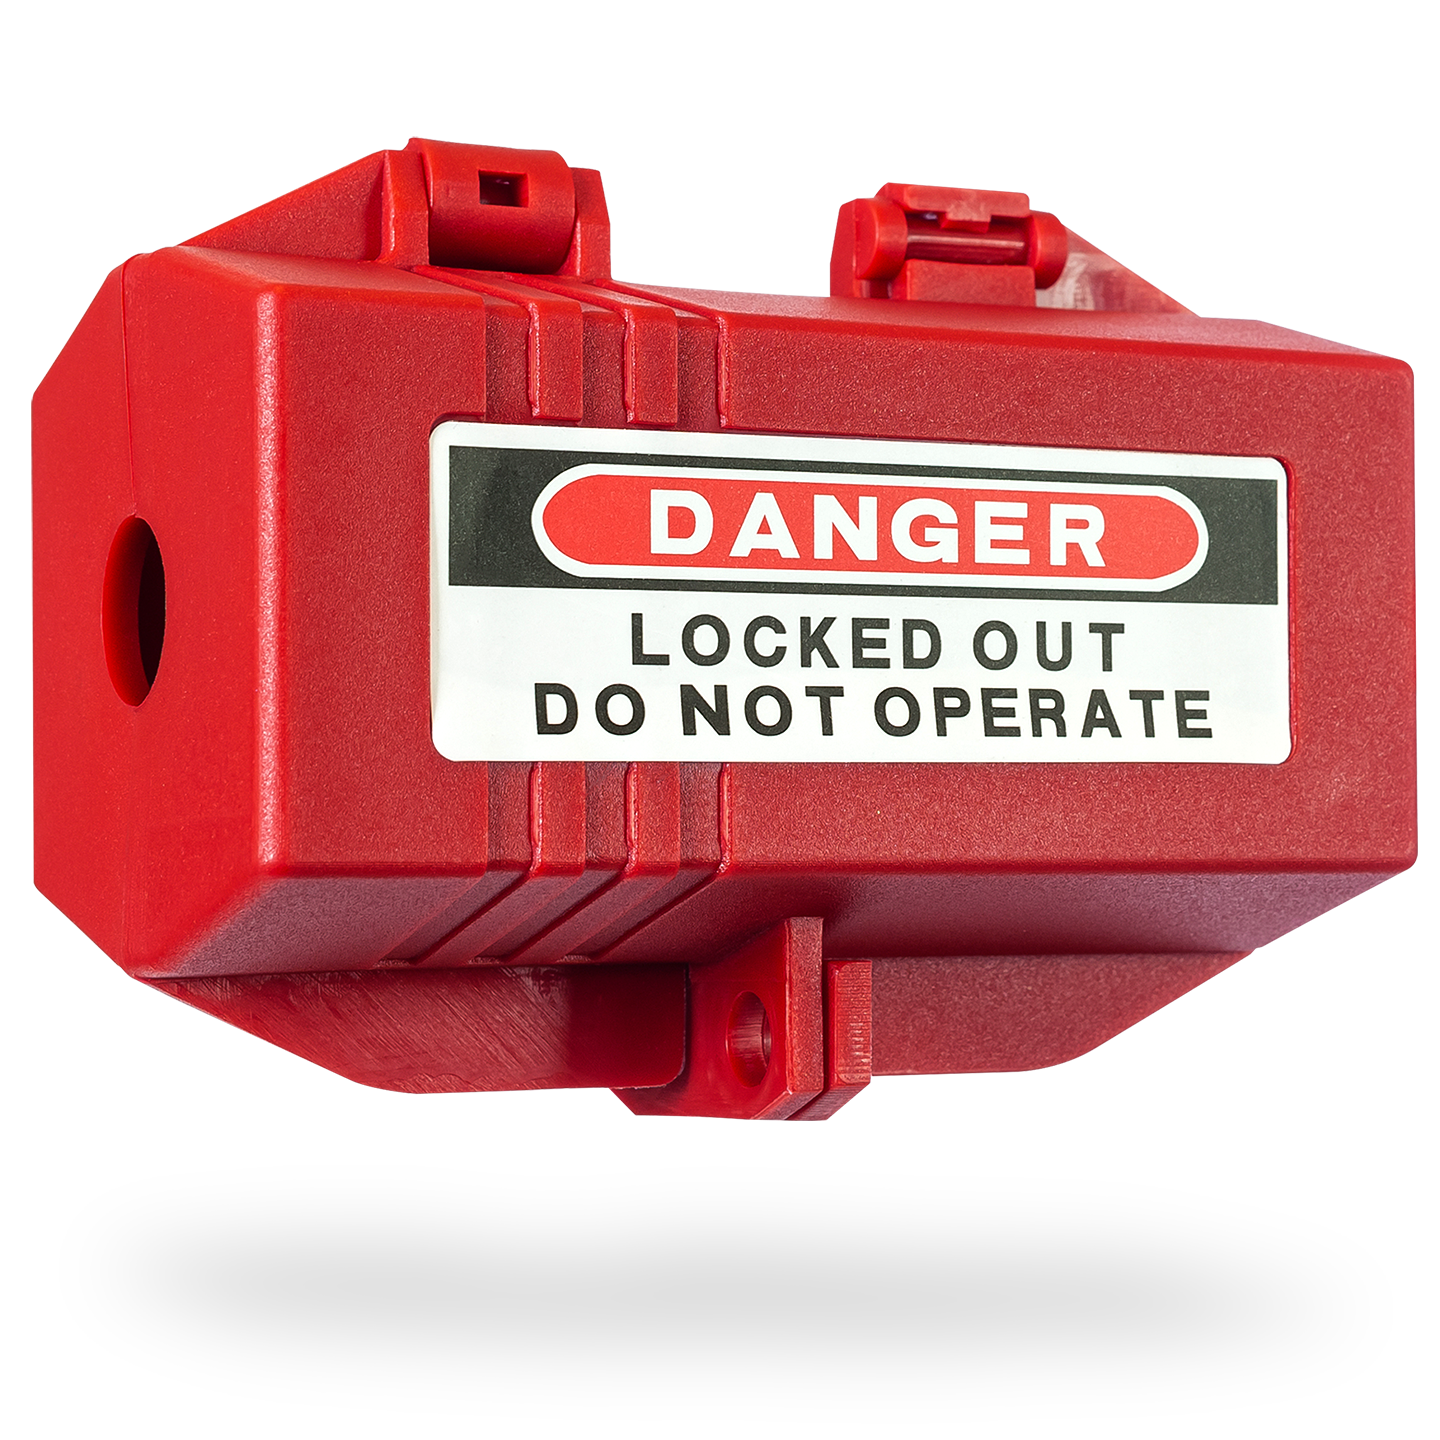 eye-level slanted front view of a closed red plug lockout